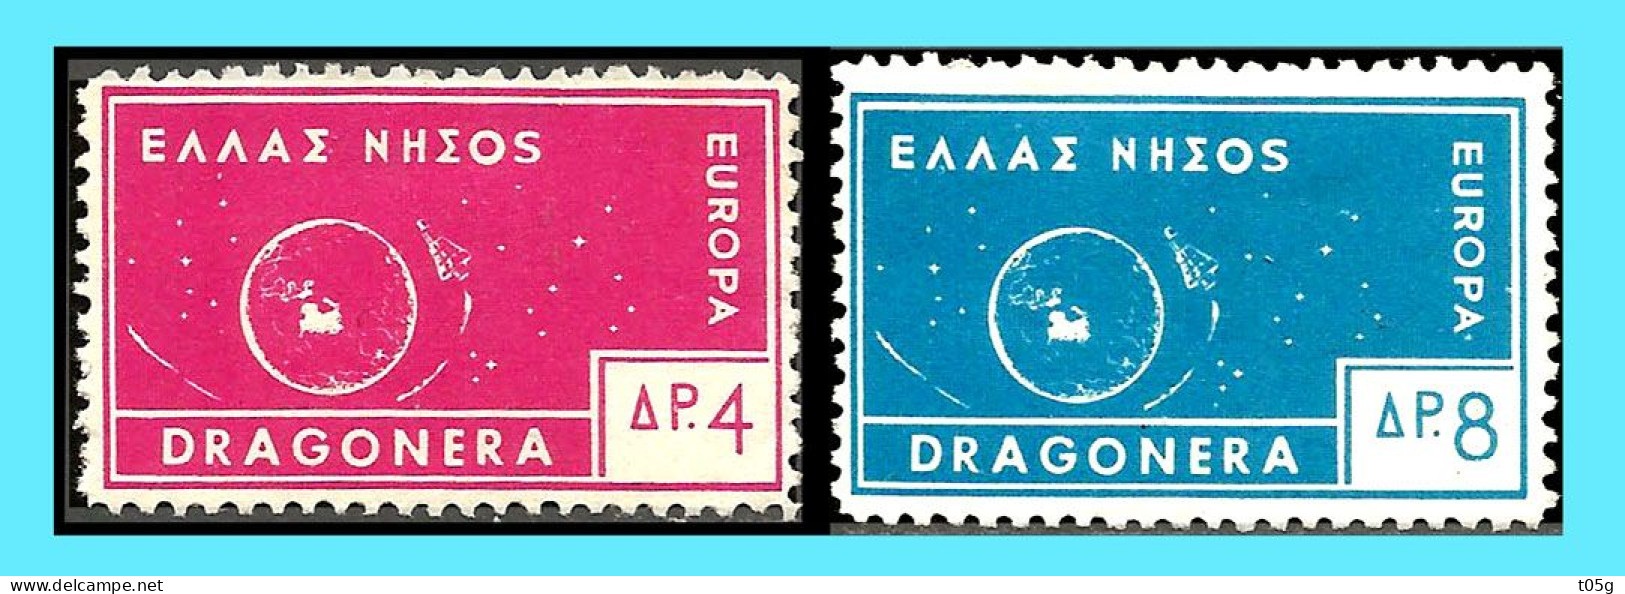 GREECE-GRECE-HELLAS - ITALY- IONIAN DRAGONERA ISLAND -EUROPA 1963: Unofficial -private Issue - Compl. Set  MNH** - Ungebraucht